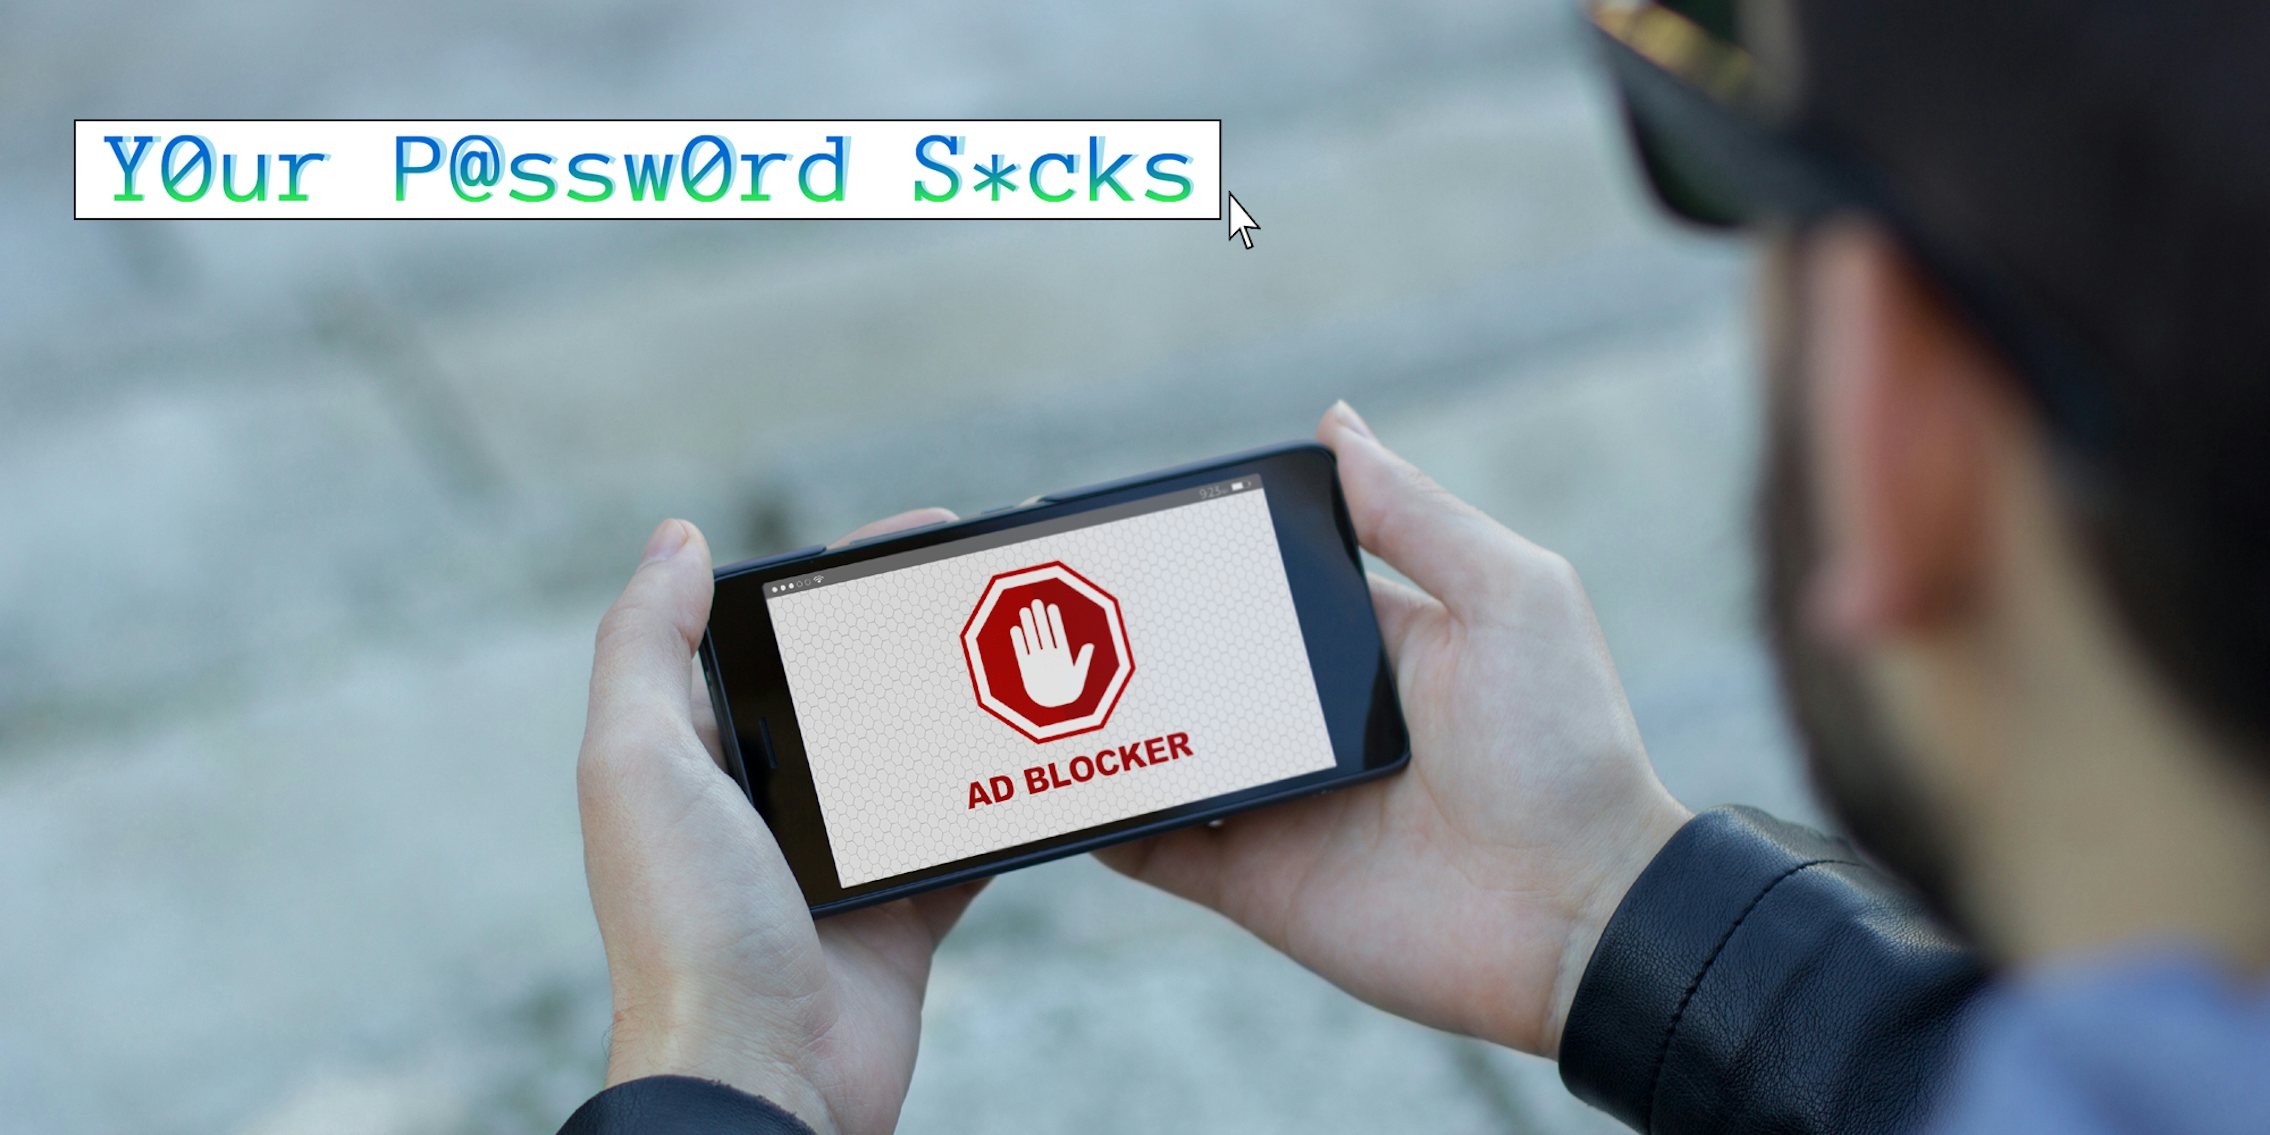 A person holding a phone with the words 'Ad Blocker' on it. The Daily Dot web_crawlr column Your Password Sucks logo is in the top left corner.